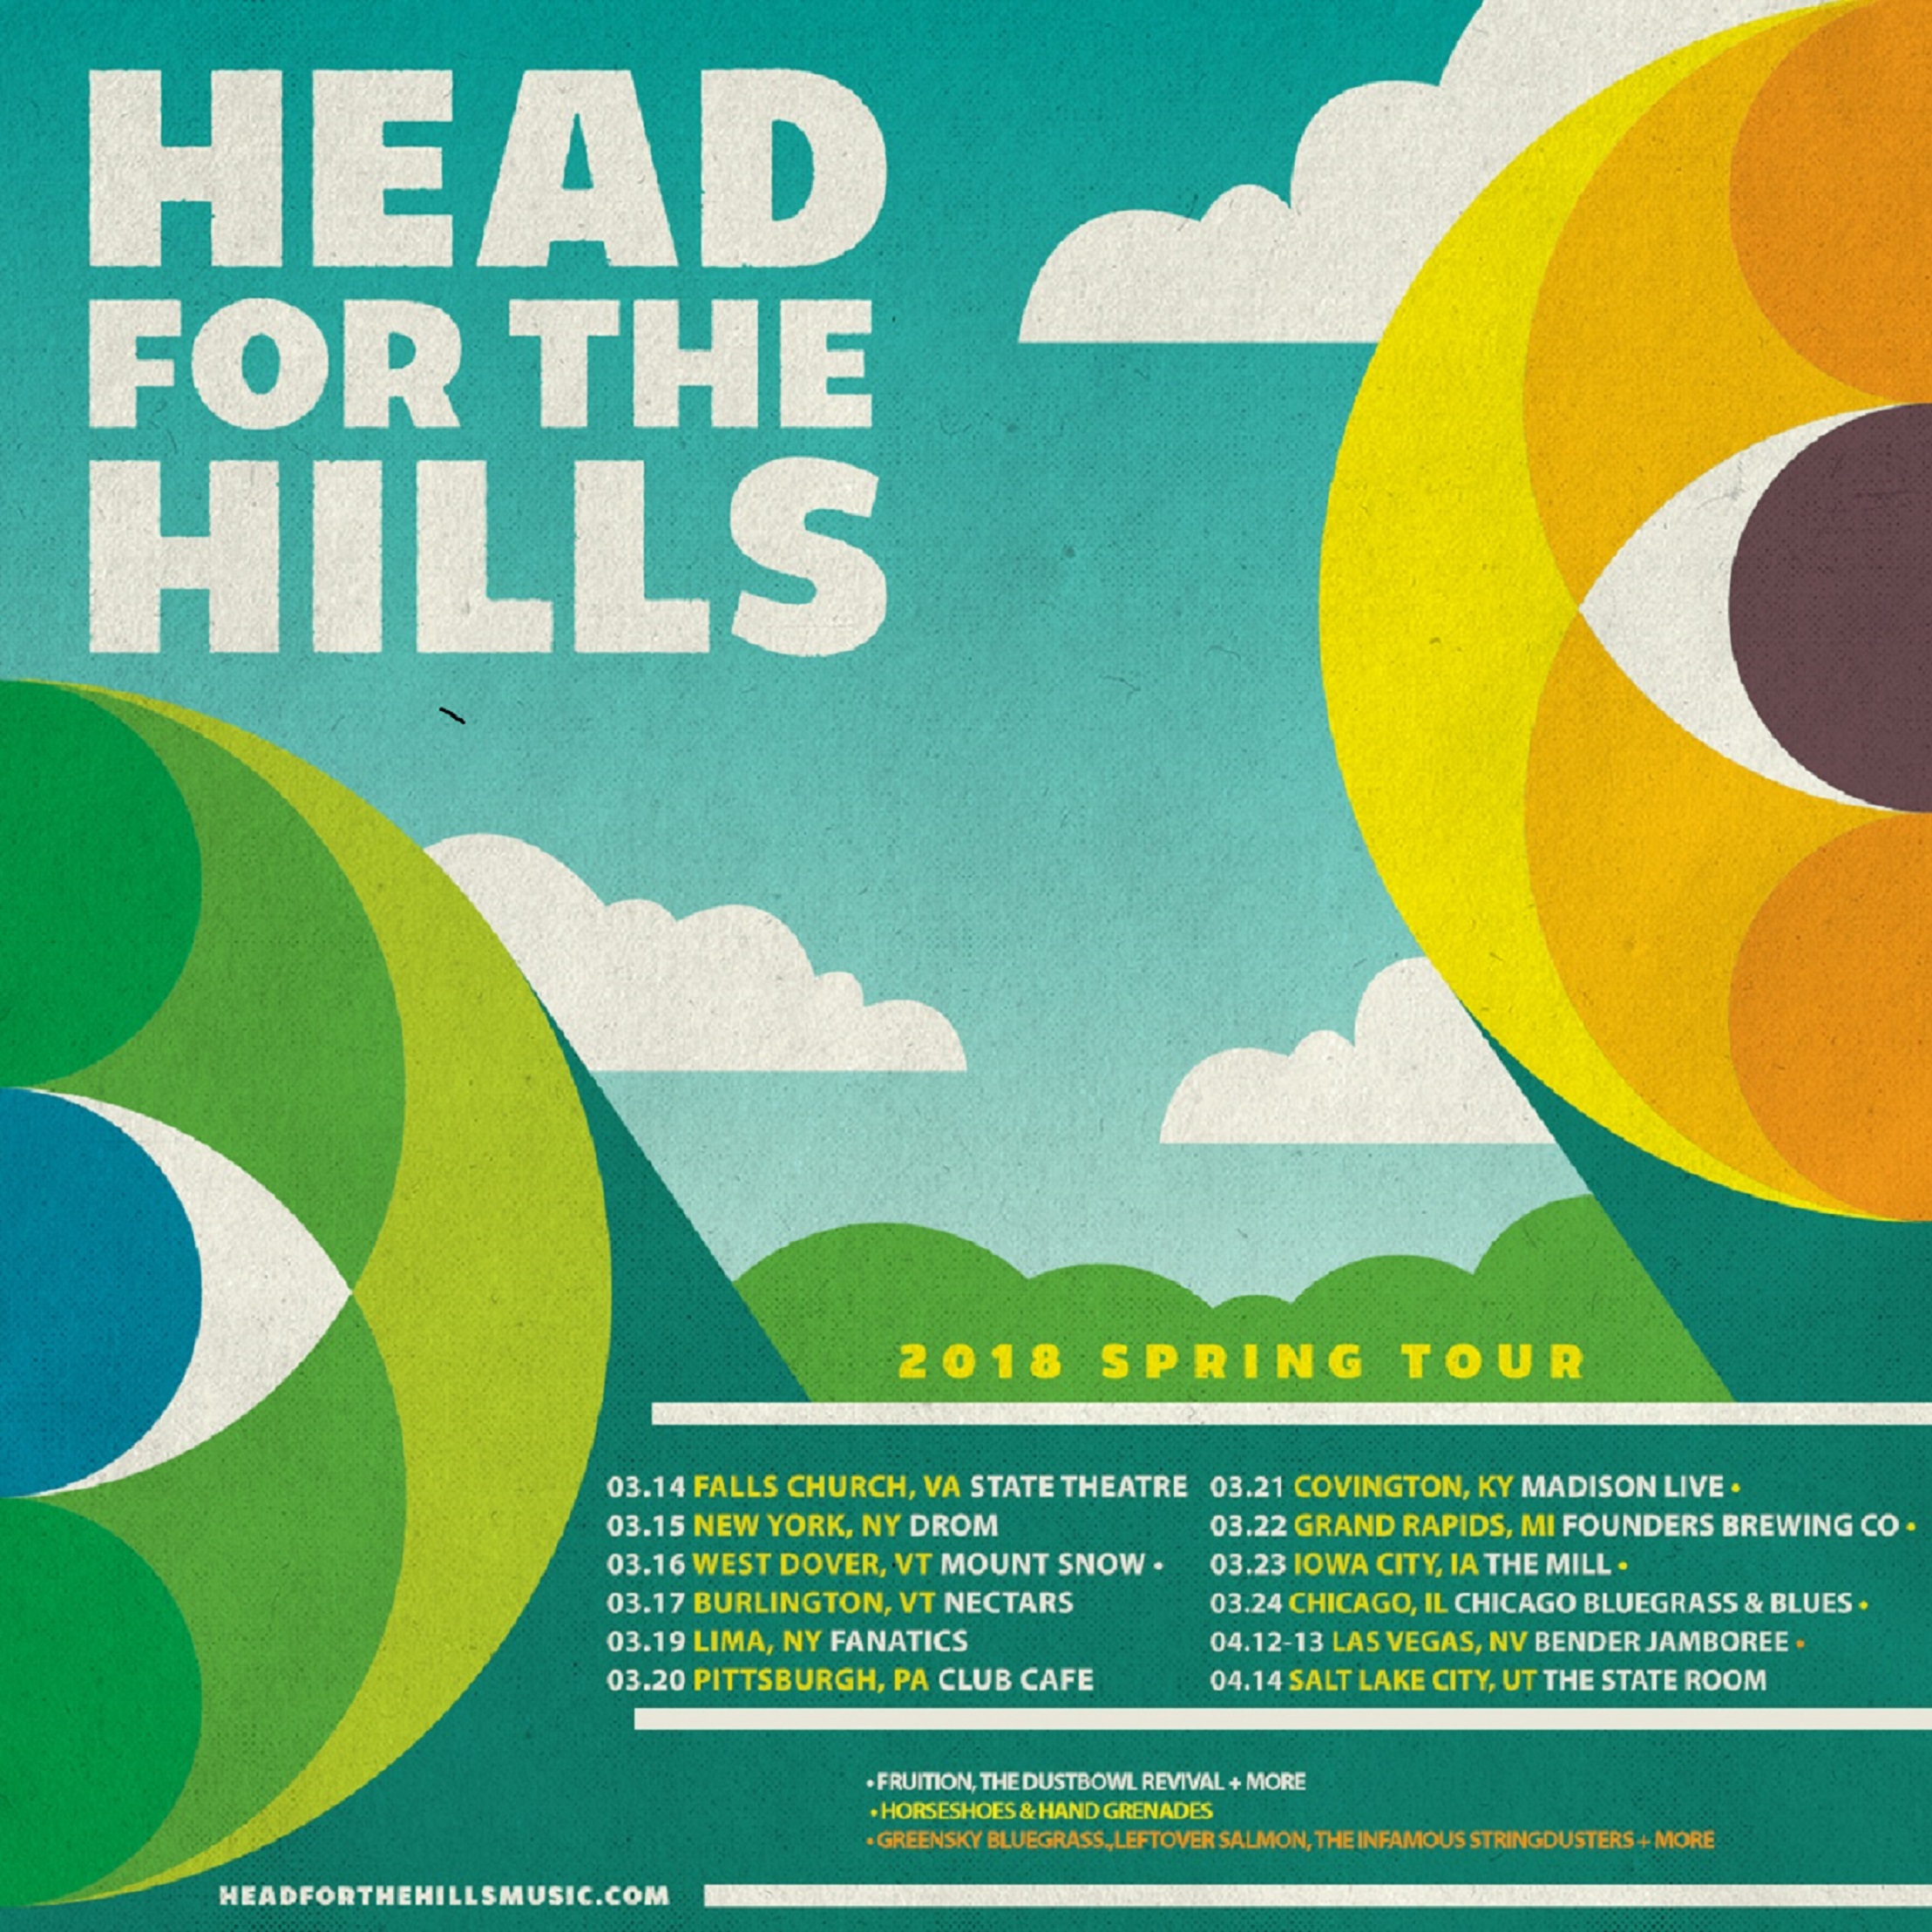 HEAD FOR THE HILLS 2018 SPRING TOUR